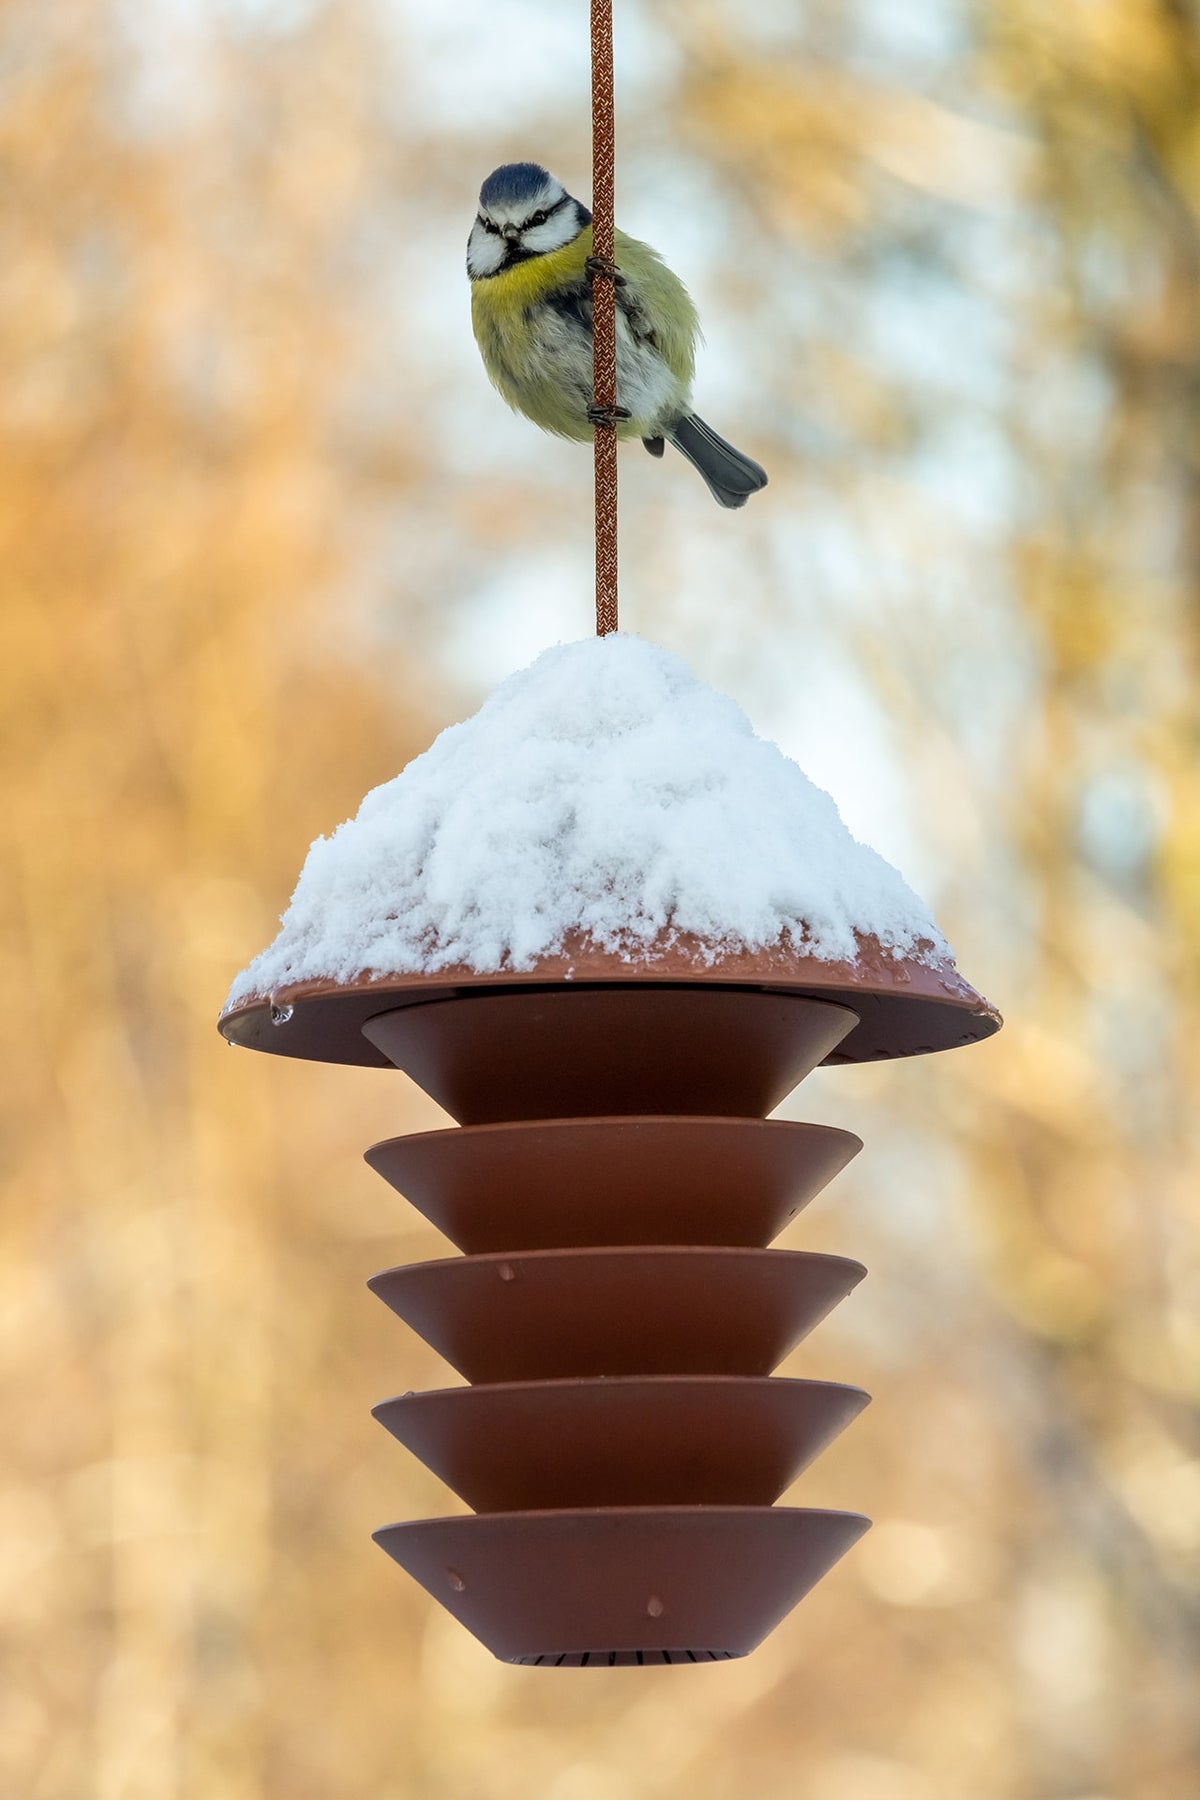 A small bird perched on a Pidät Bird Silo in the snow.